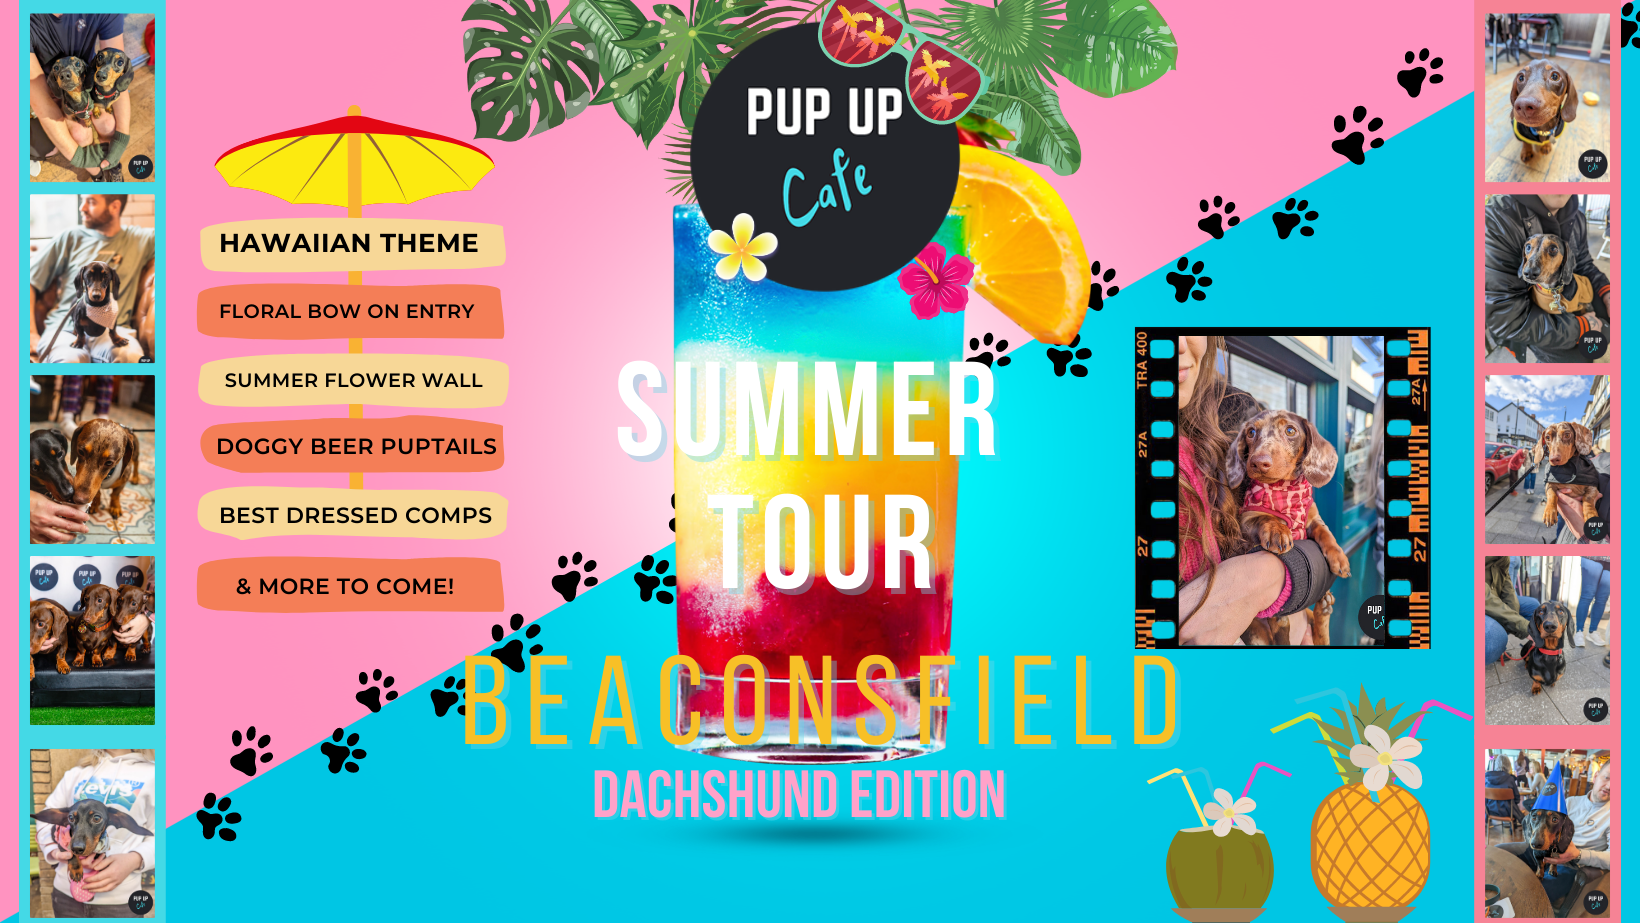 Dachshund Pup Up Cafe – Beaconsfield | SUMMER TOUR! 🌞